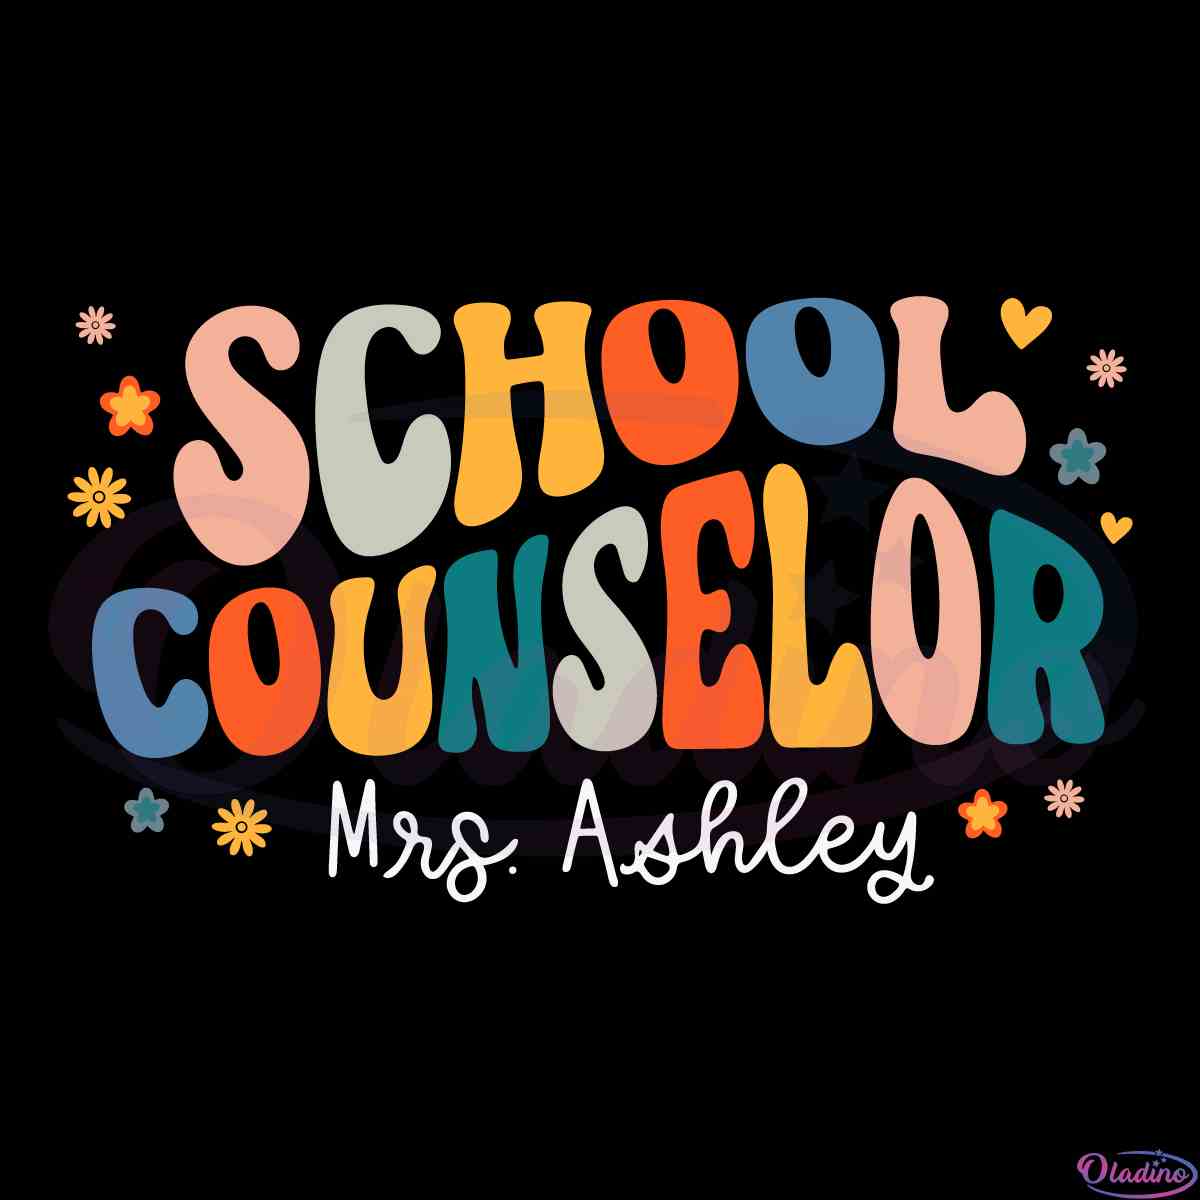 personalized-school-counselor-back-to-school-svg-cut-files